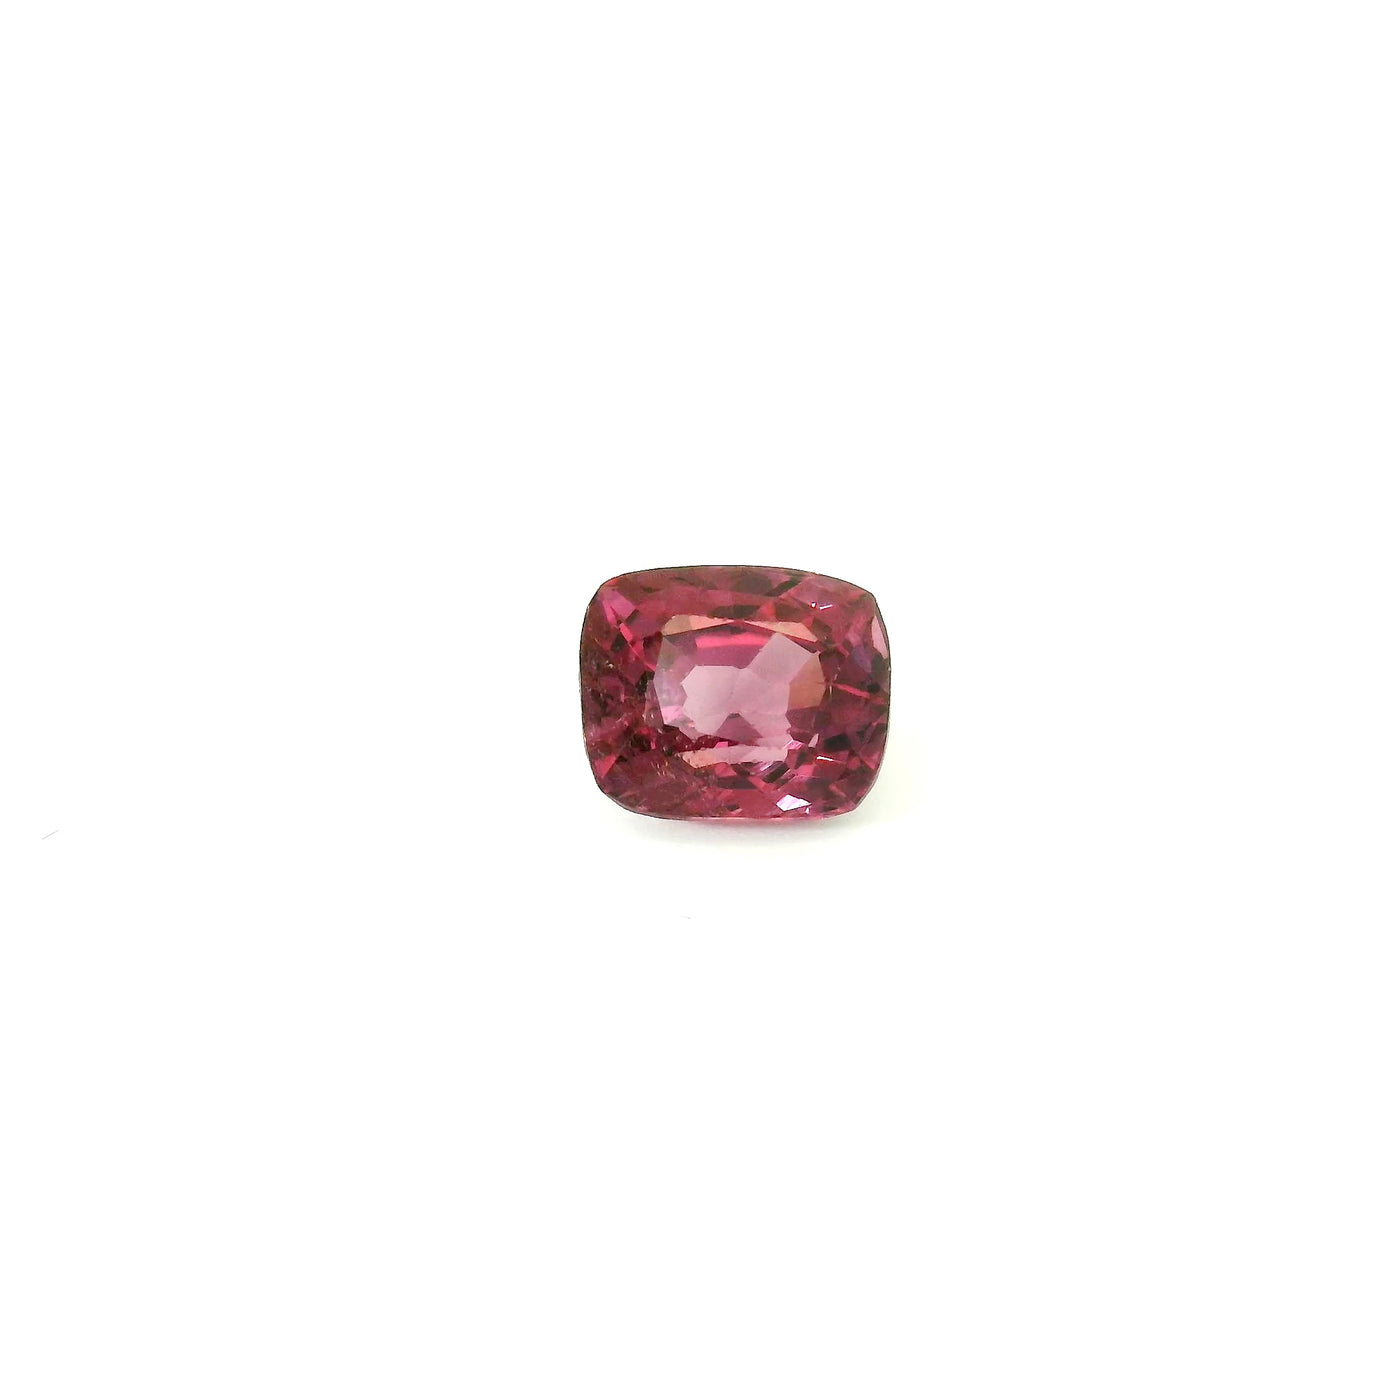 Spinelle rose 1.31 carats